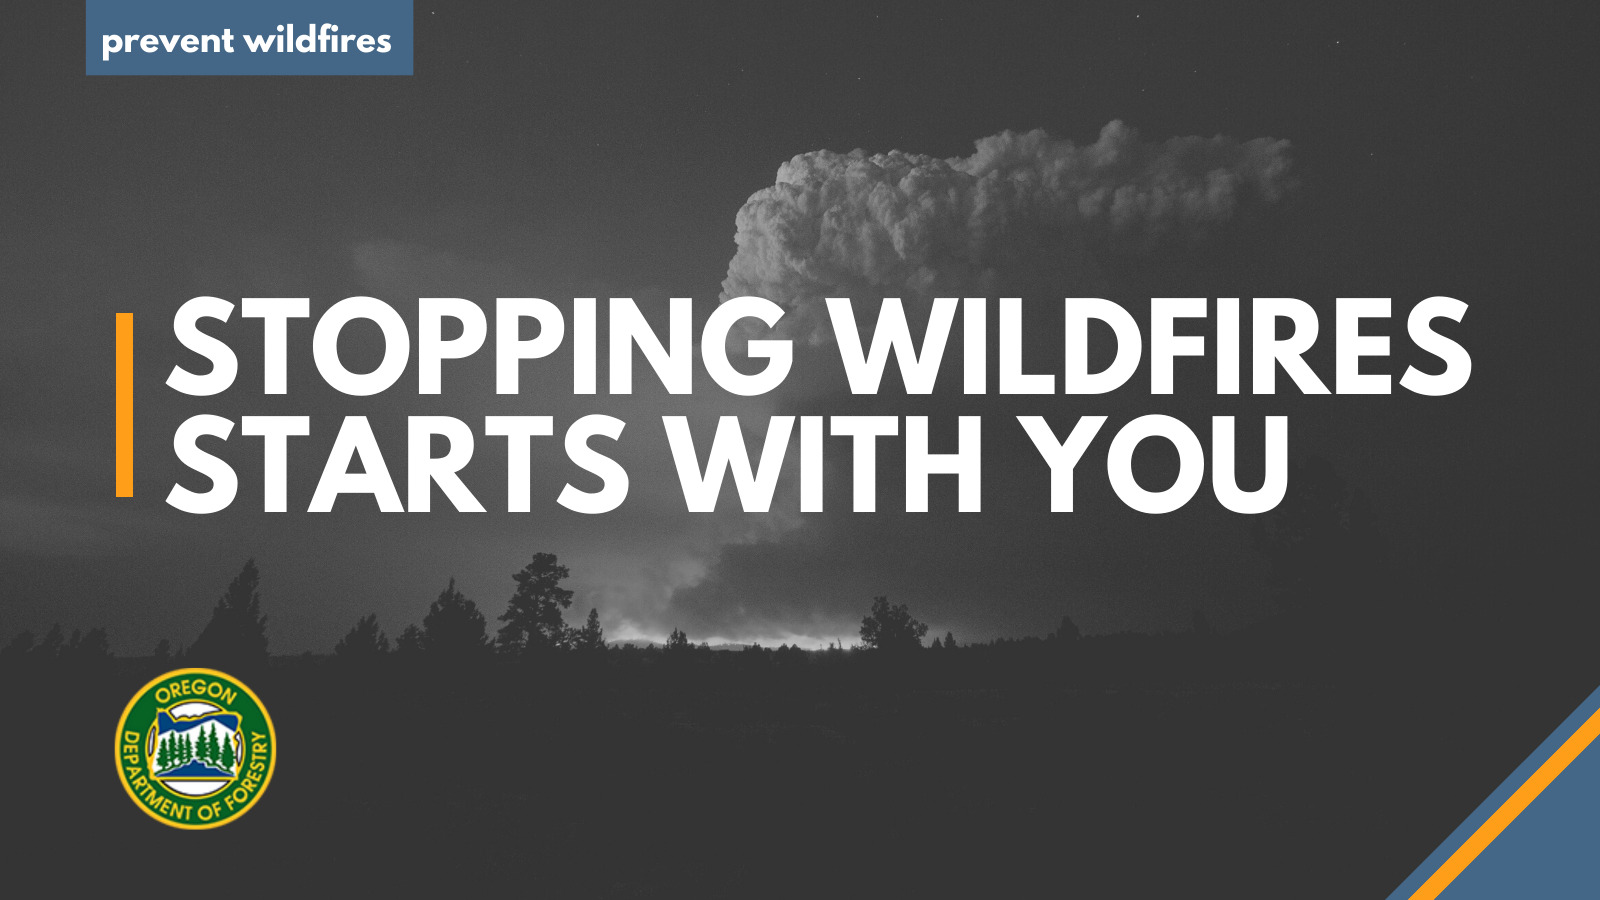 Stopping wildfires starts with you